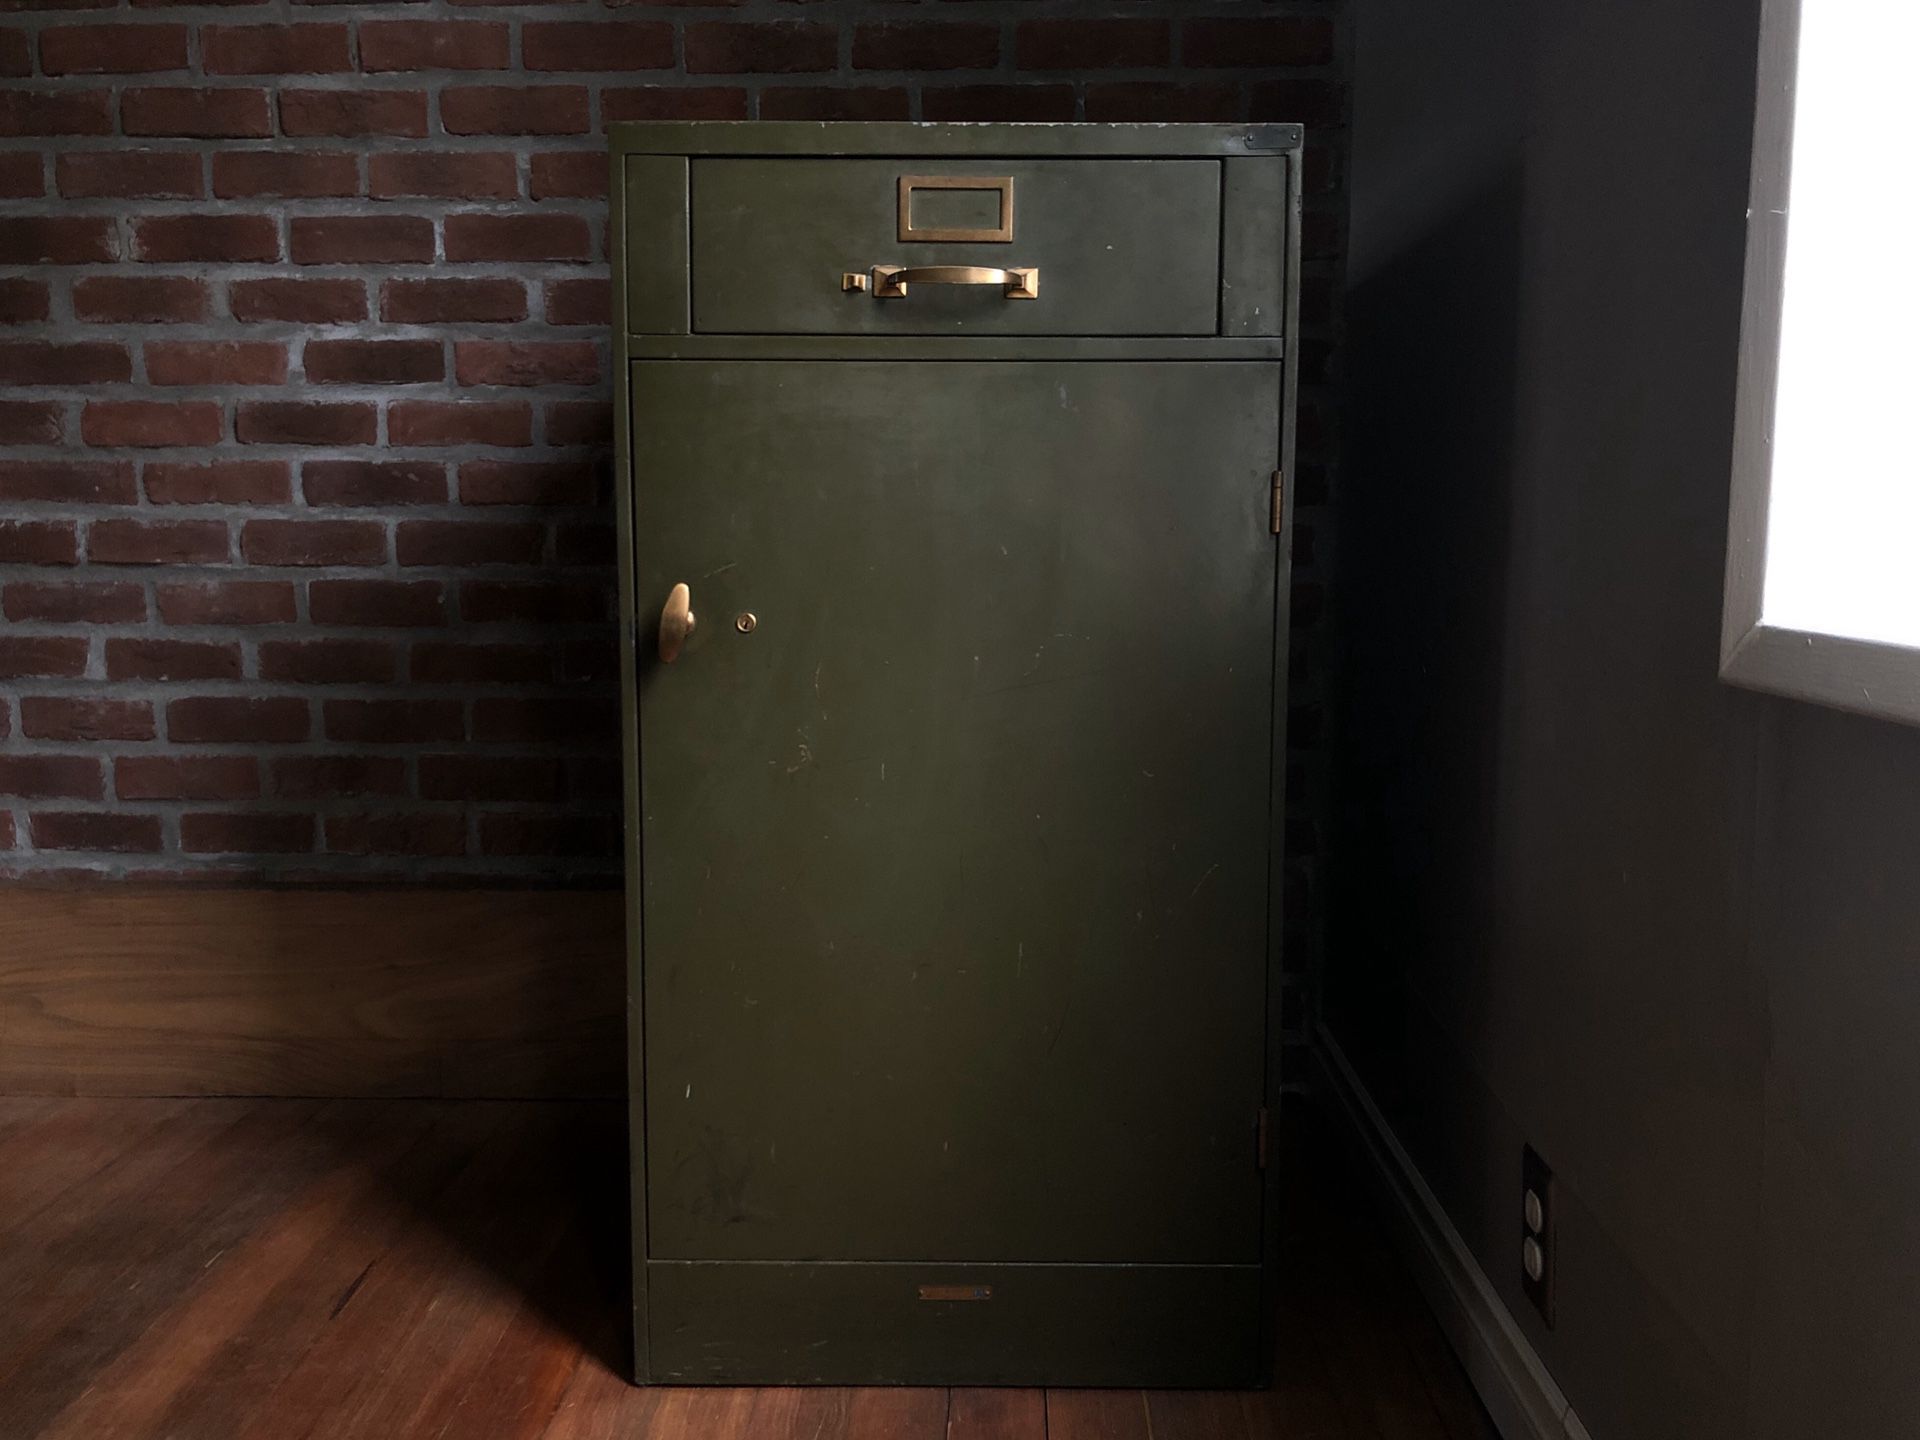 Vintage US Postal Service Metal Cabinet made by The Globe Wernicke Co.